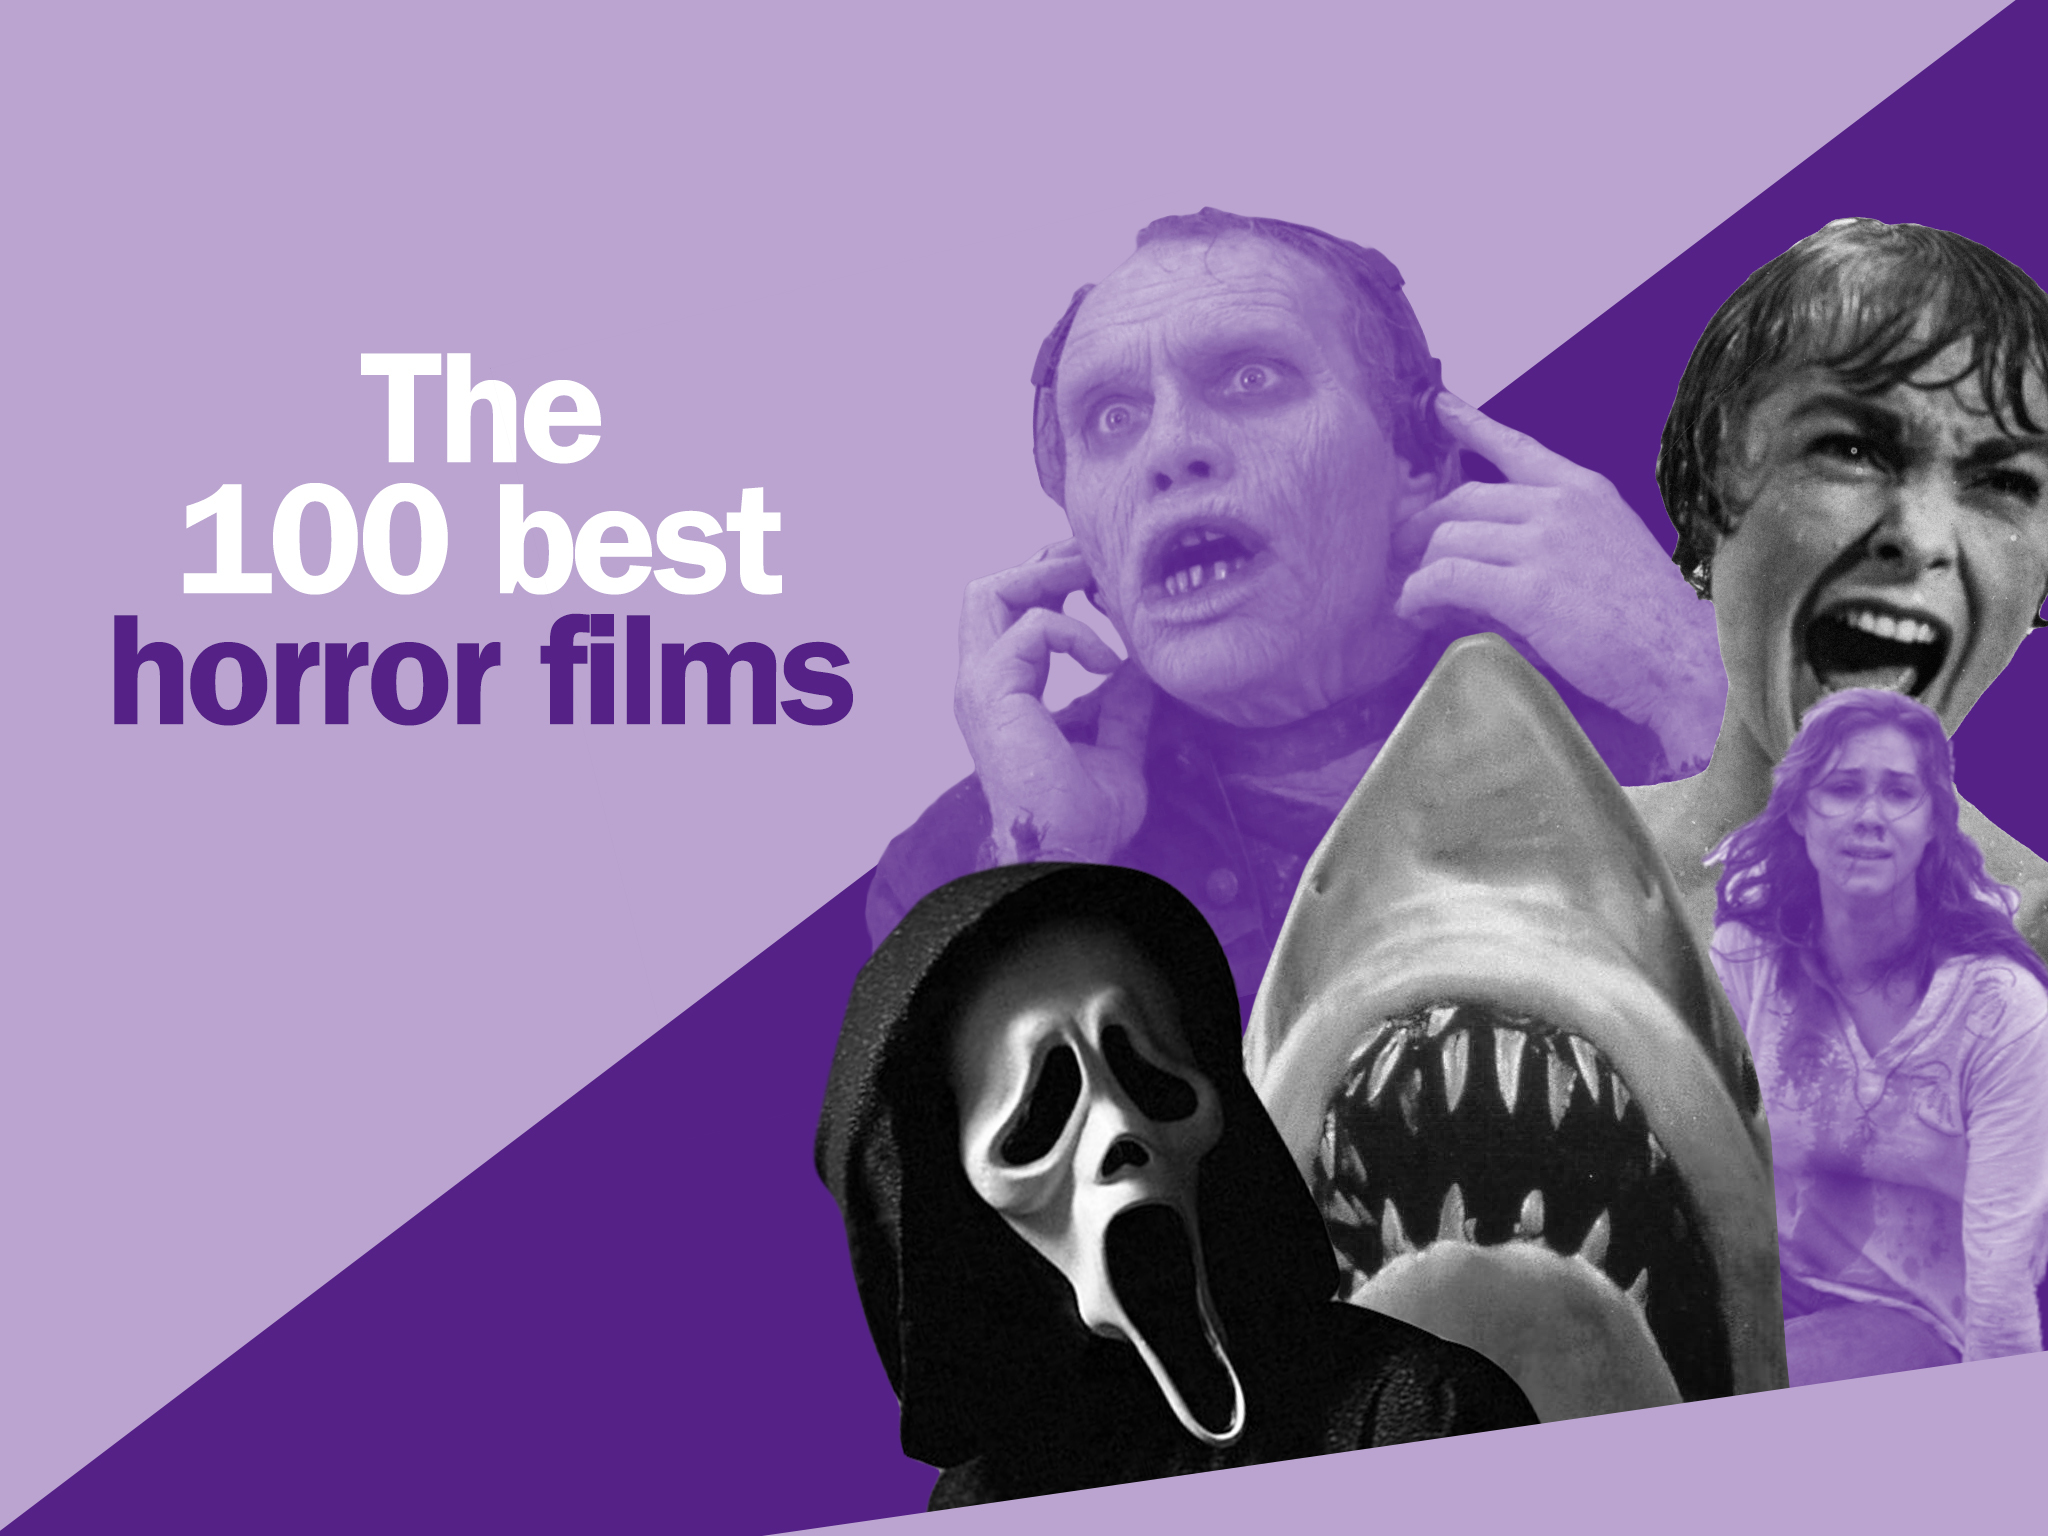 The 100 Best Horror Movies of All Time photo image